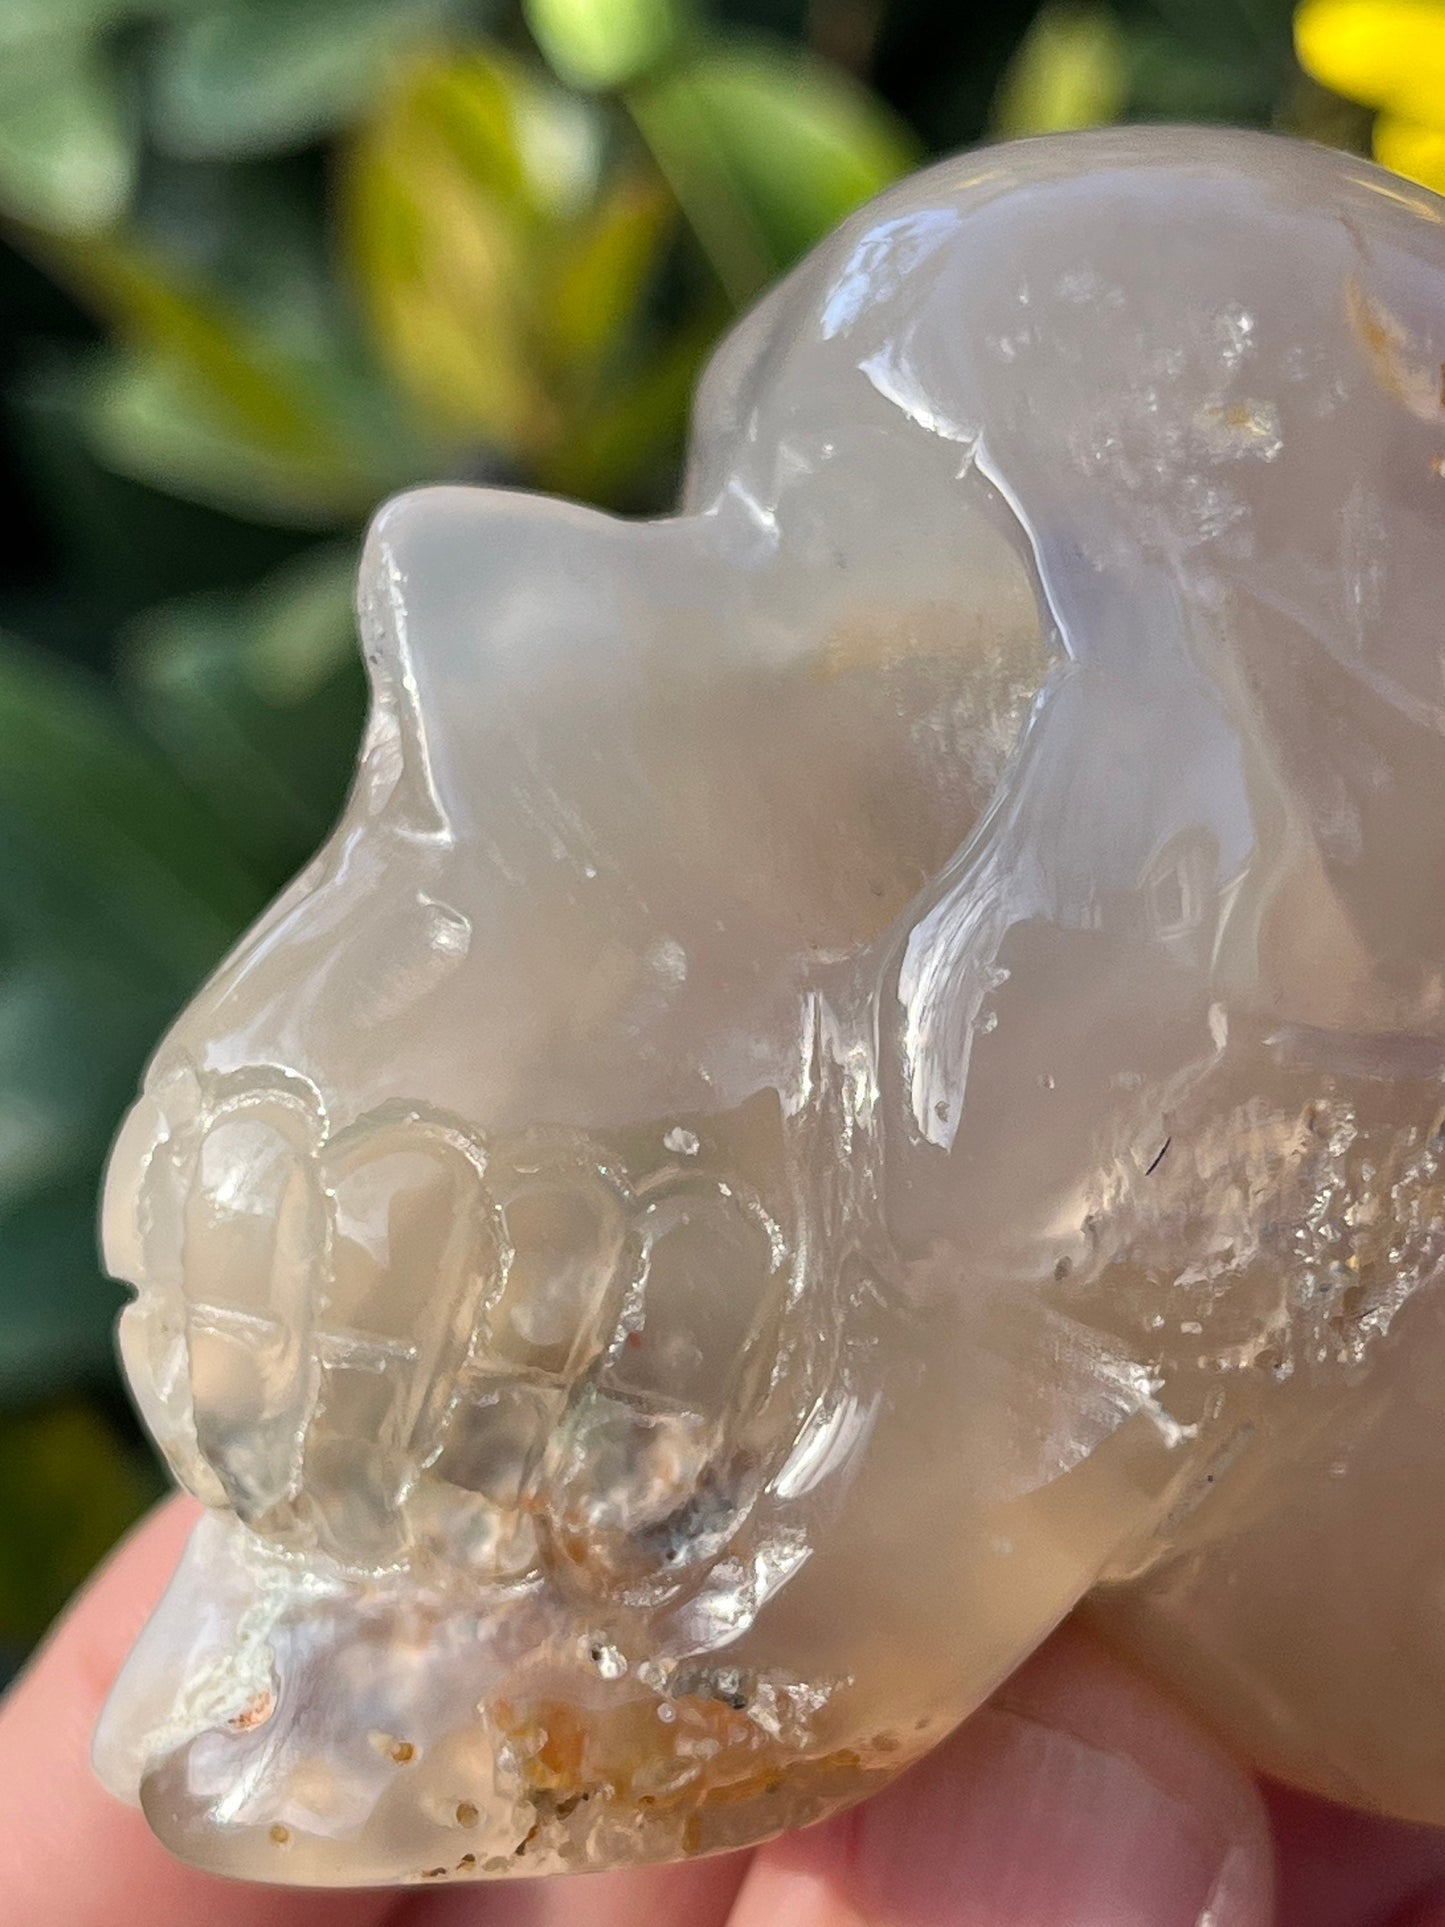 3" Flower Agate Skull Polished Natural Carved Stone Crystal Minerals ~ Human Skull Art Carving Type3